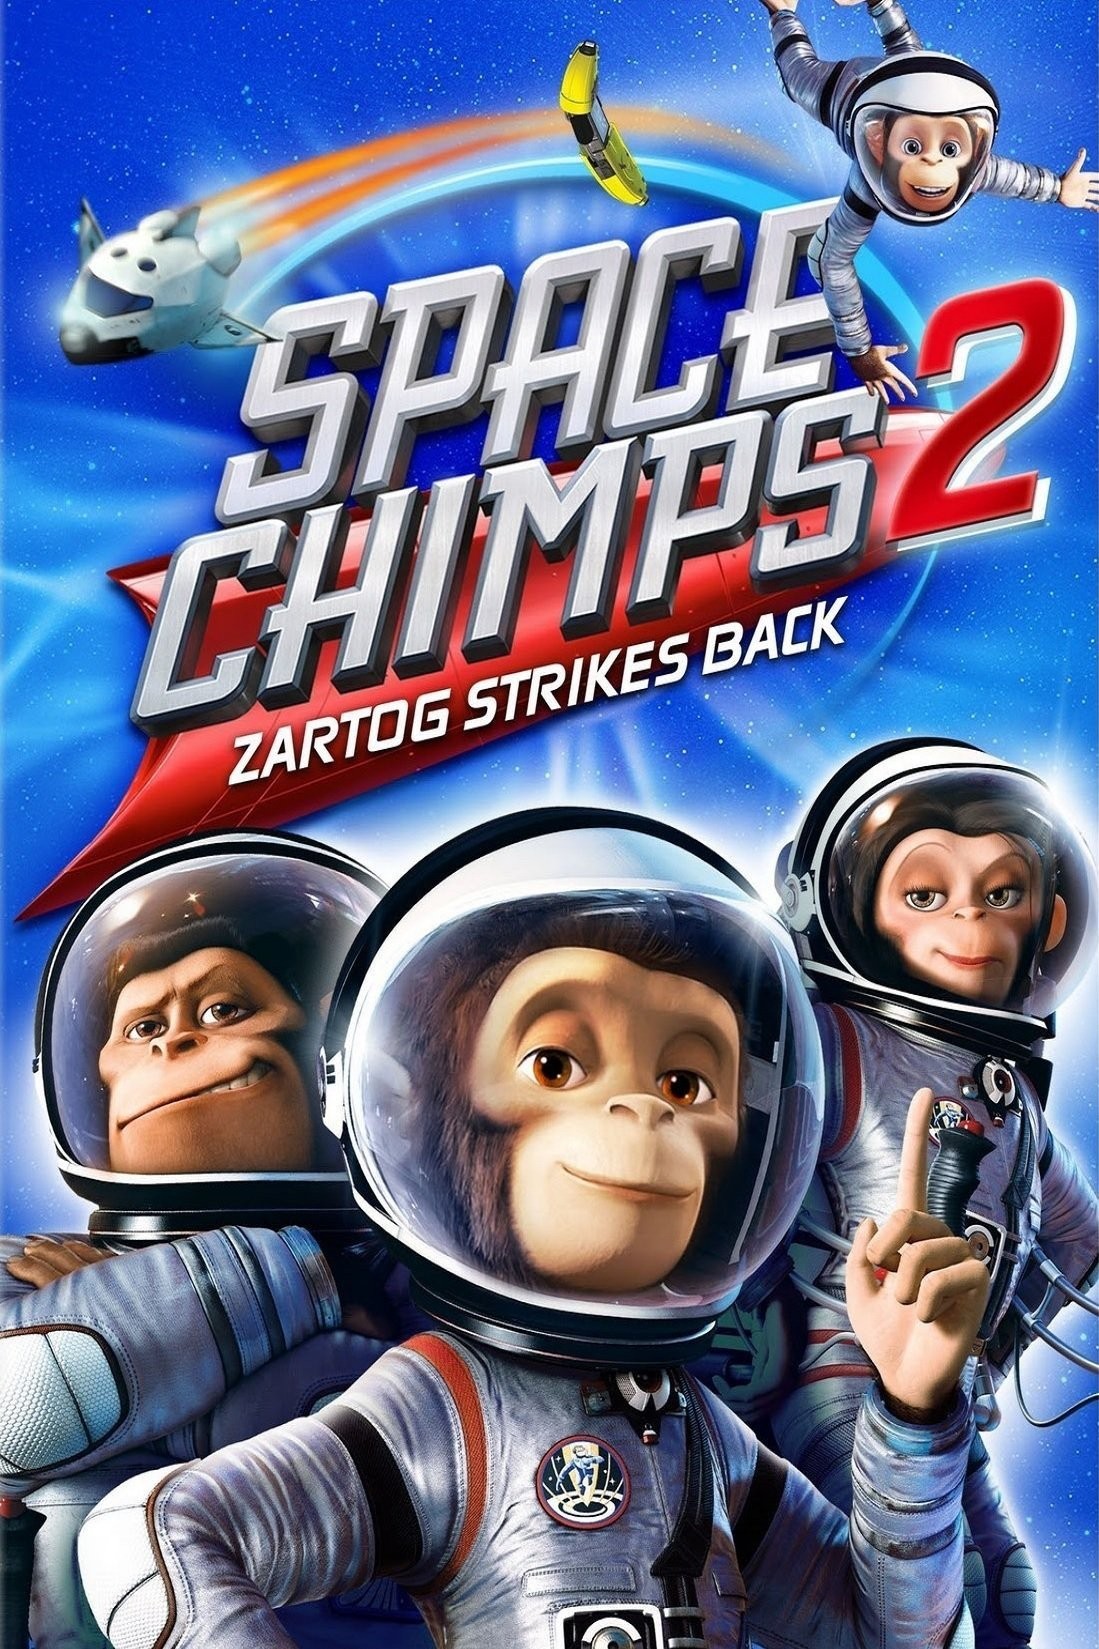 Space chimps watch online 123movies